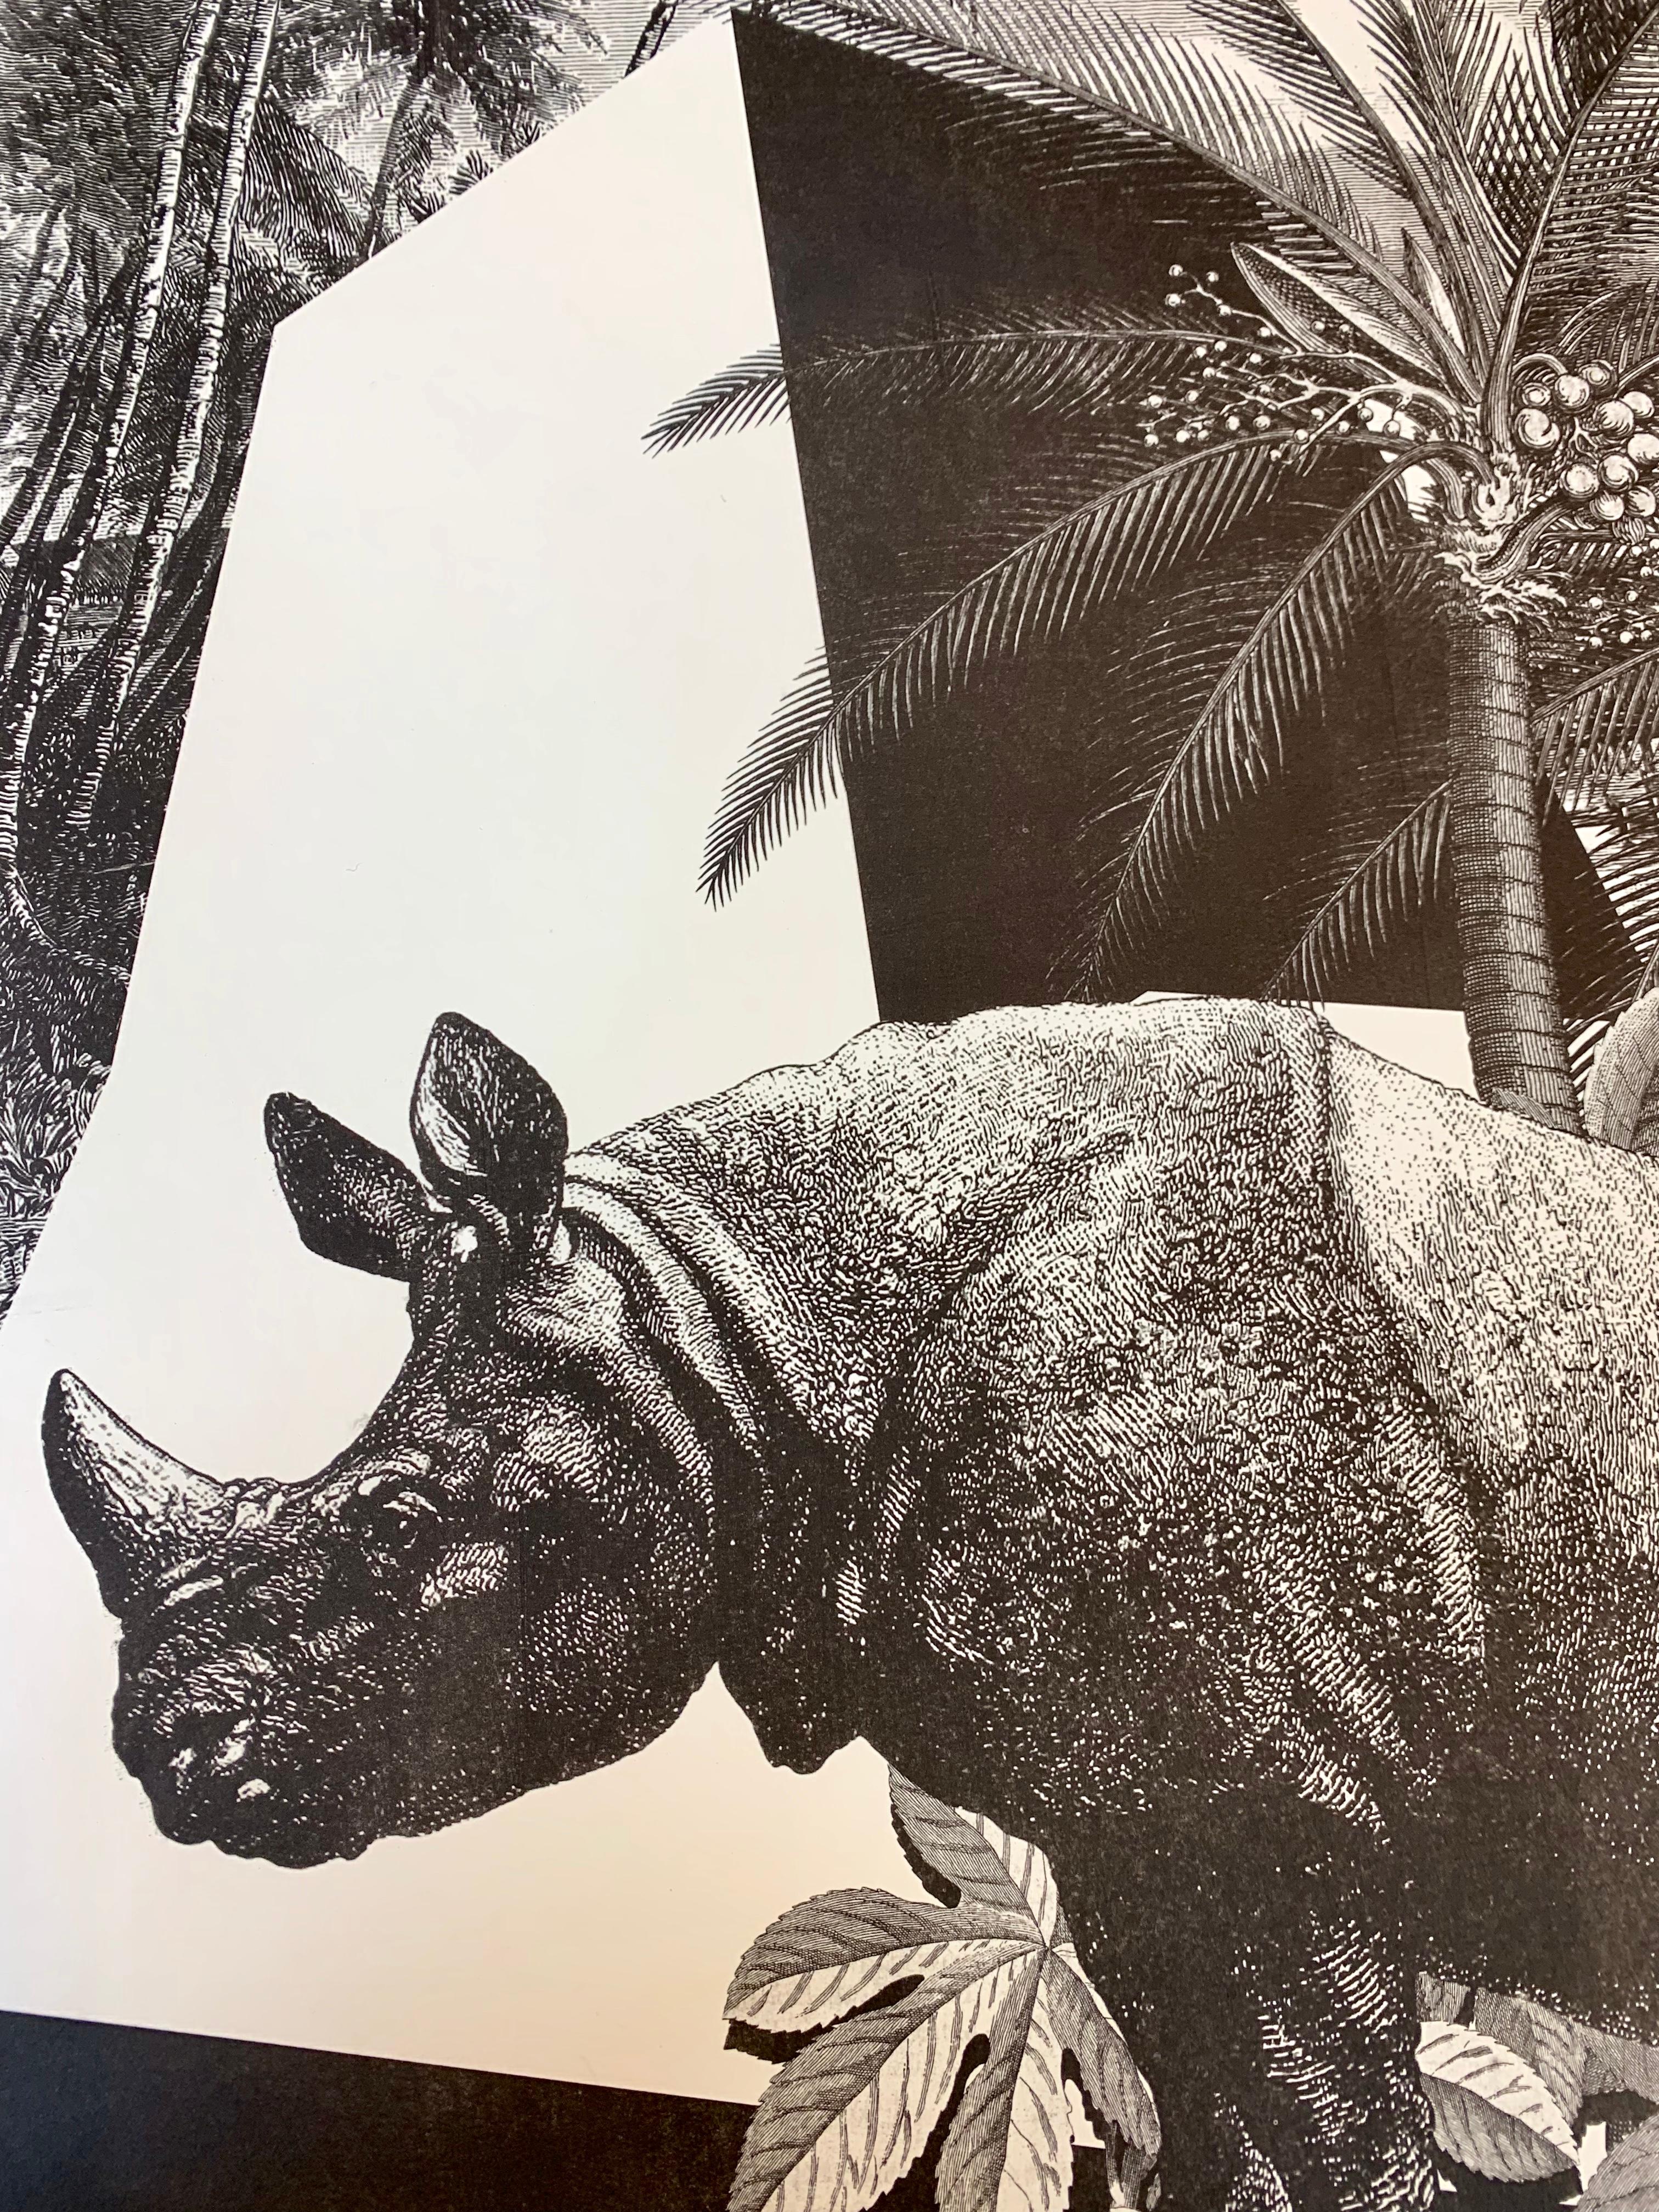 From the limited edition series ''Black & Wild''. Black and white image of tropical fauna and flora handprinted with an antique  press on 100% cotton engraving paper. Panthers rhinos and tropical birds pose against a lush background of